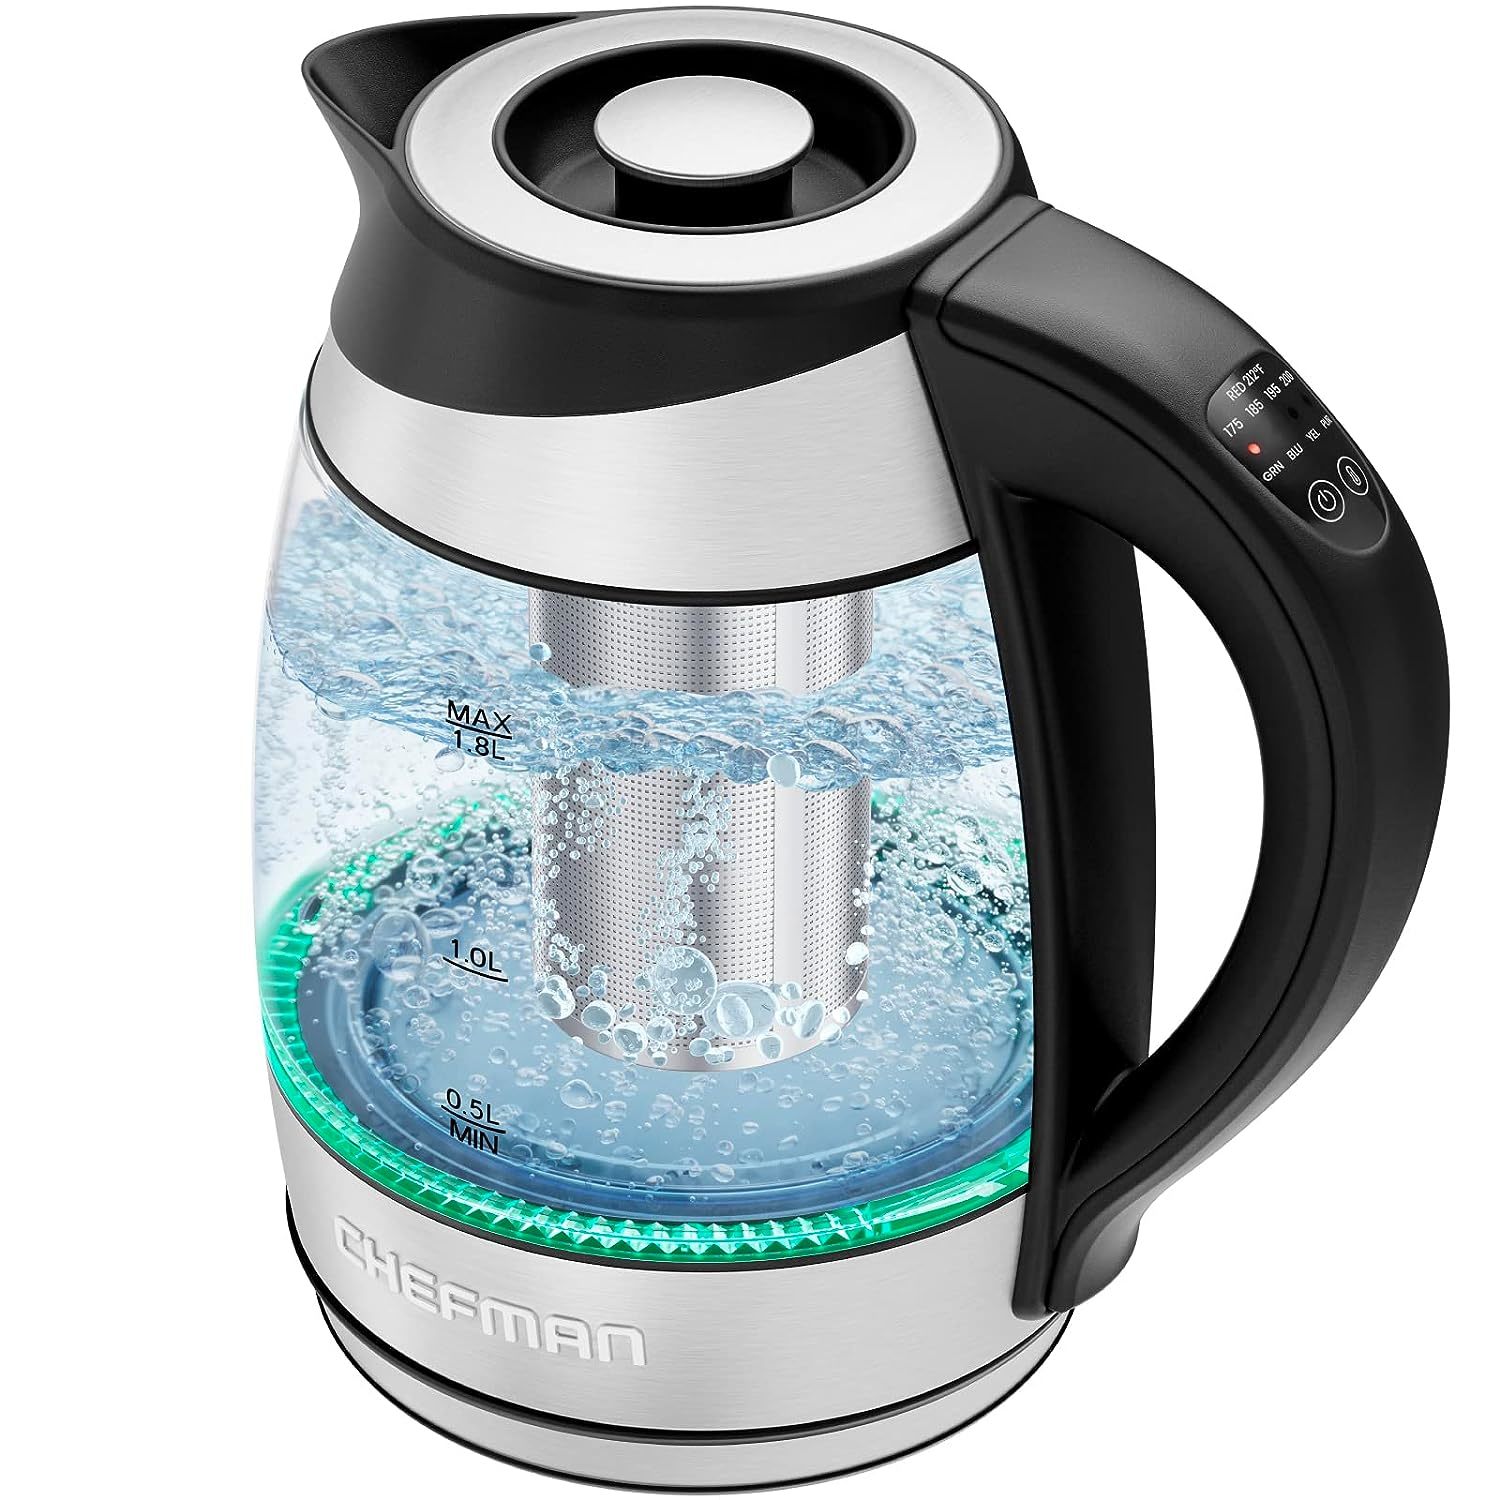 Breville IQ 1.8 Liter Electric Kettle, Brushed Stainless Steel